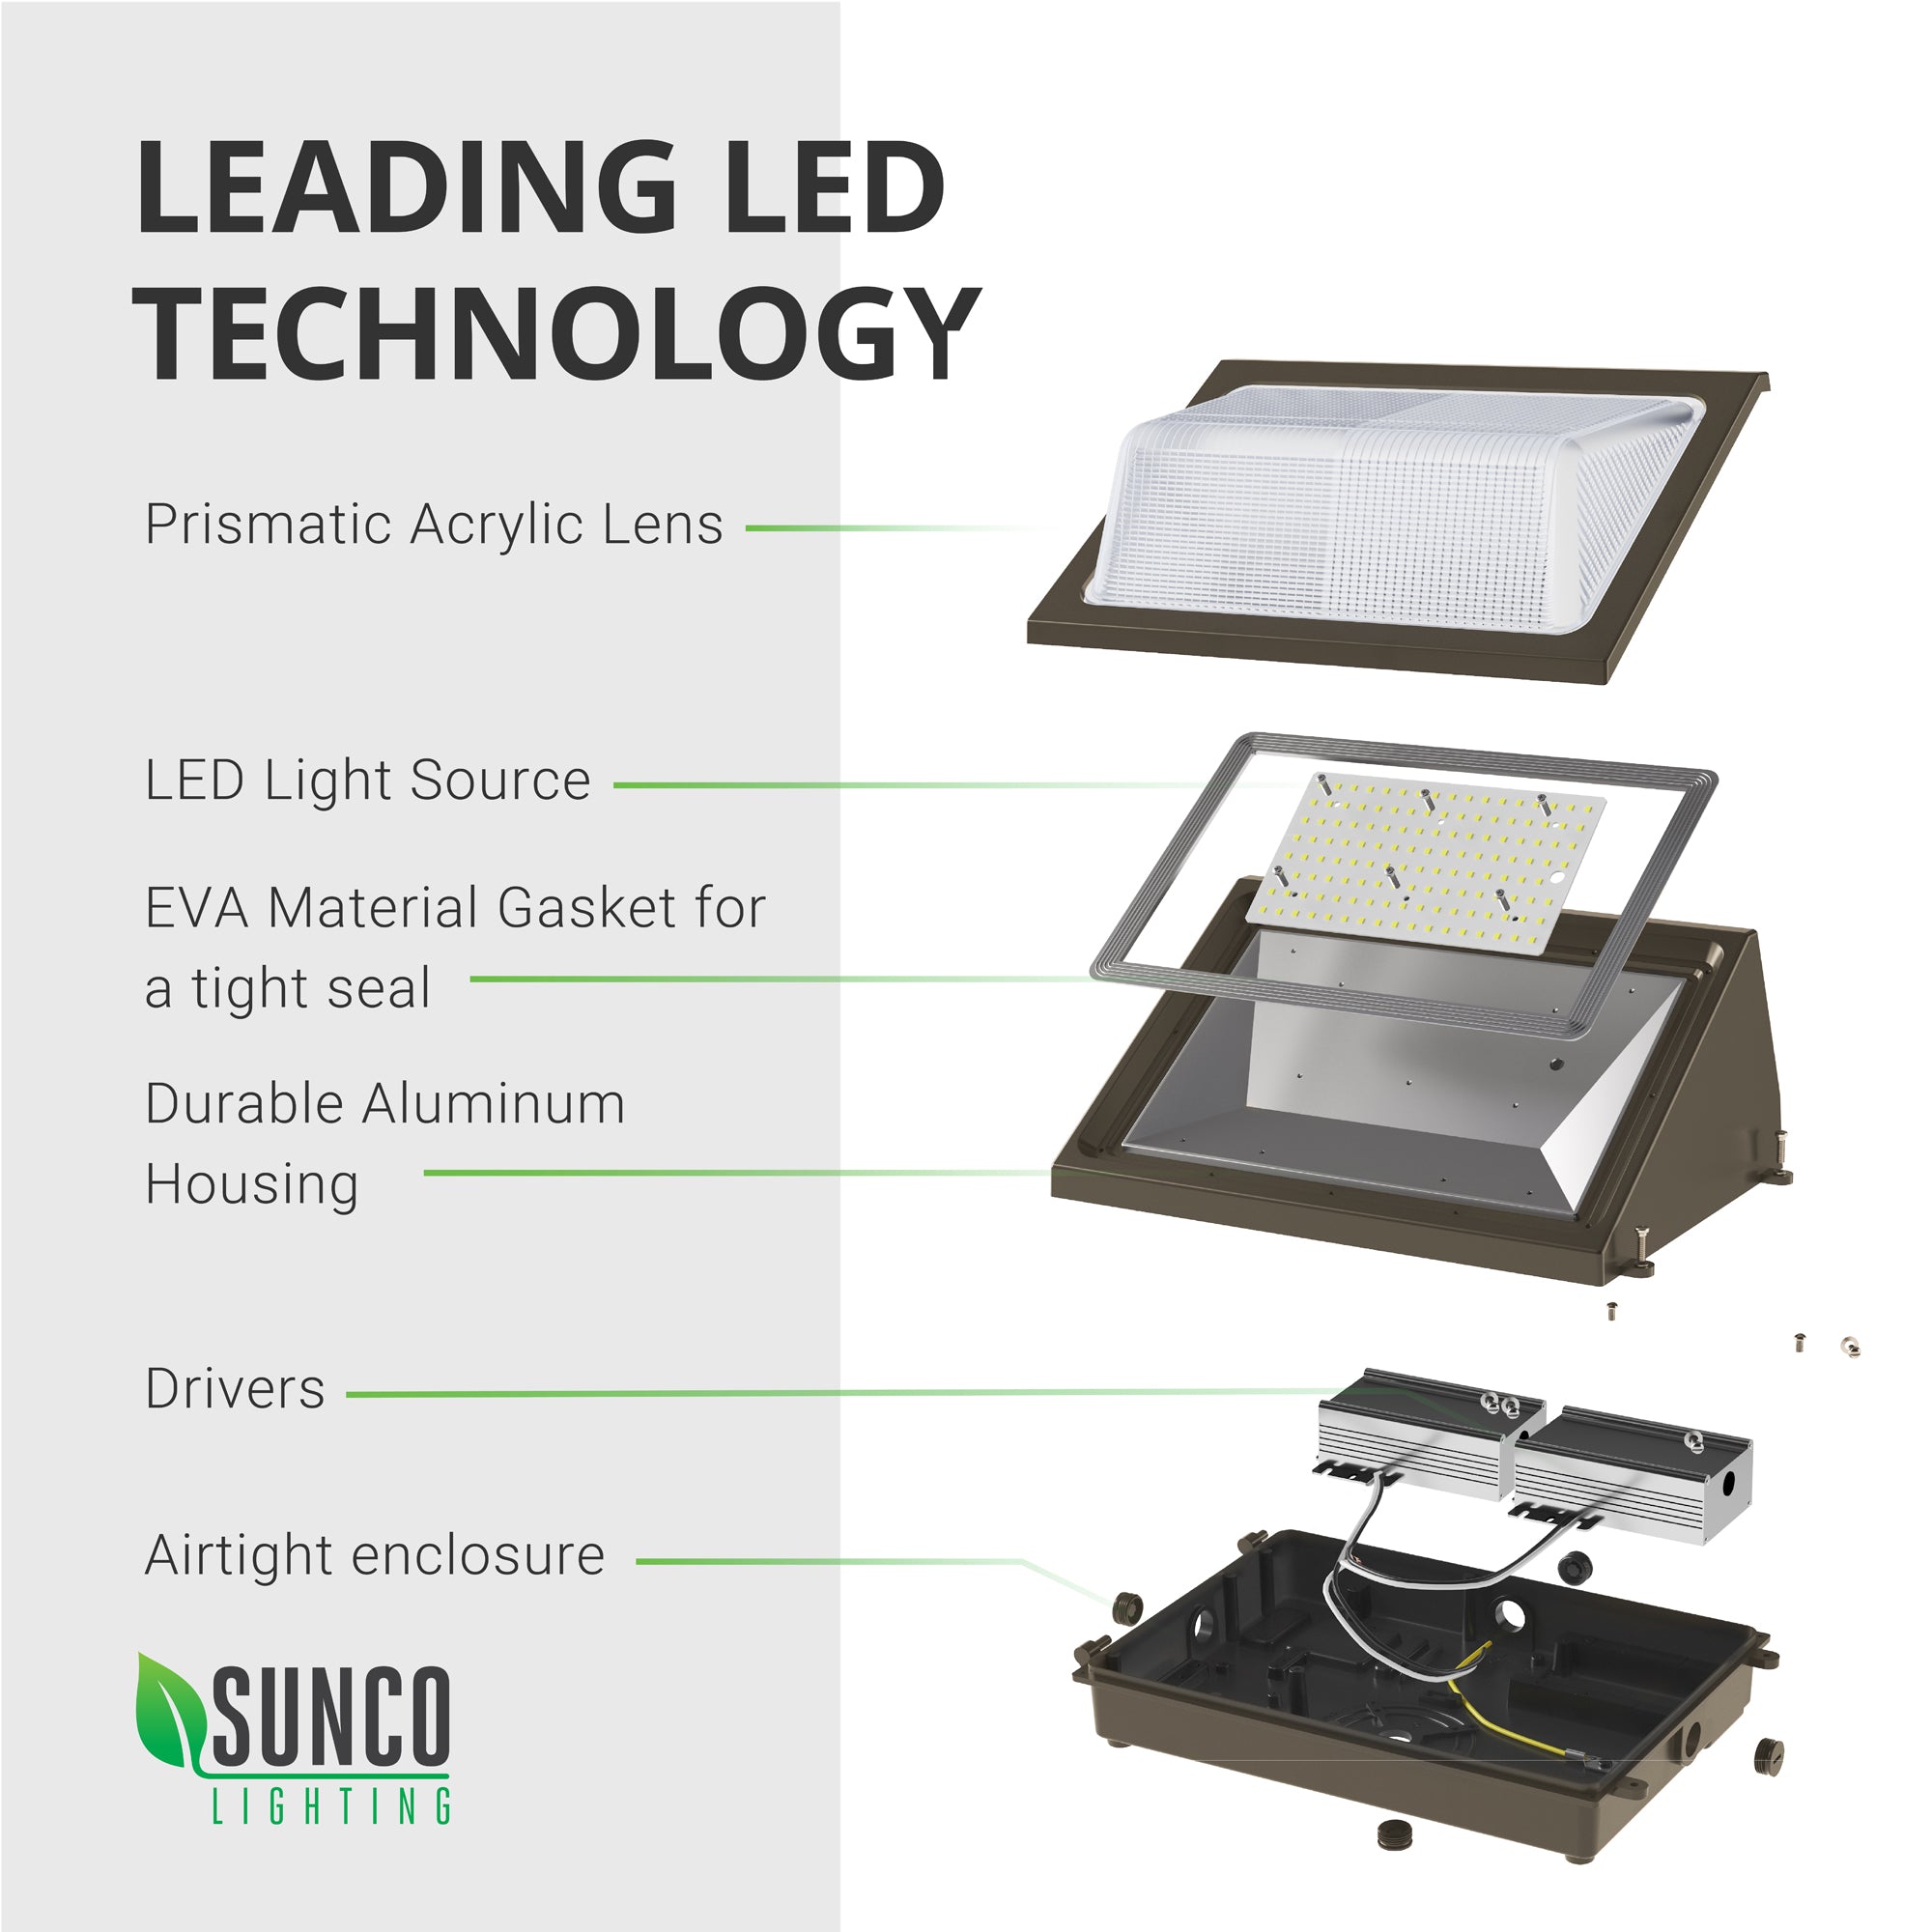 Leading LED Technology. 120W Wall Pack includes a Prismatic Acrylic Lens, the LED chip board, an EVA material gasket for a tight seal, and a durable, aluminum housing. There are 2 LED drivers and an airtight base enclosure. Image shows an exploded diagram of the integrated LED fixture to show you all the components. Easy install manual available under the Support tab on this website.